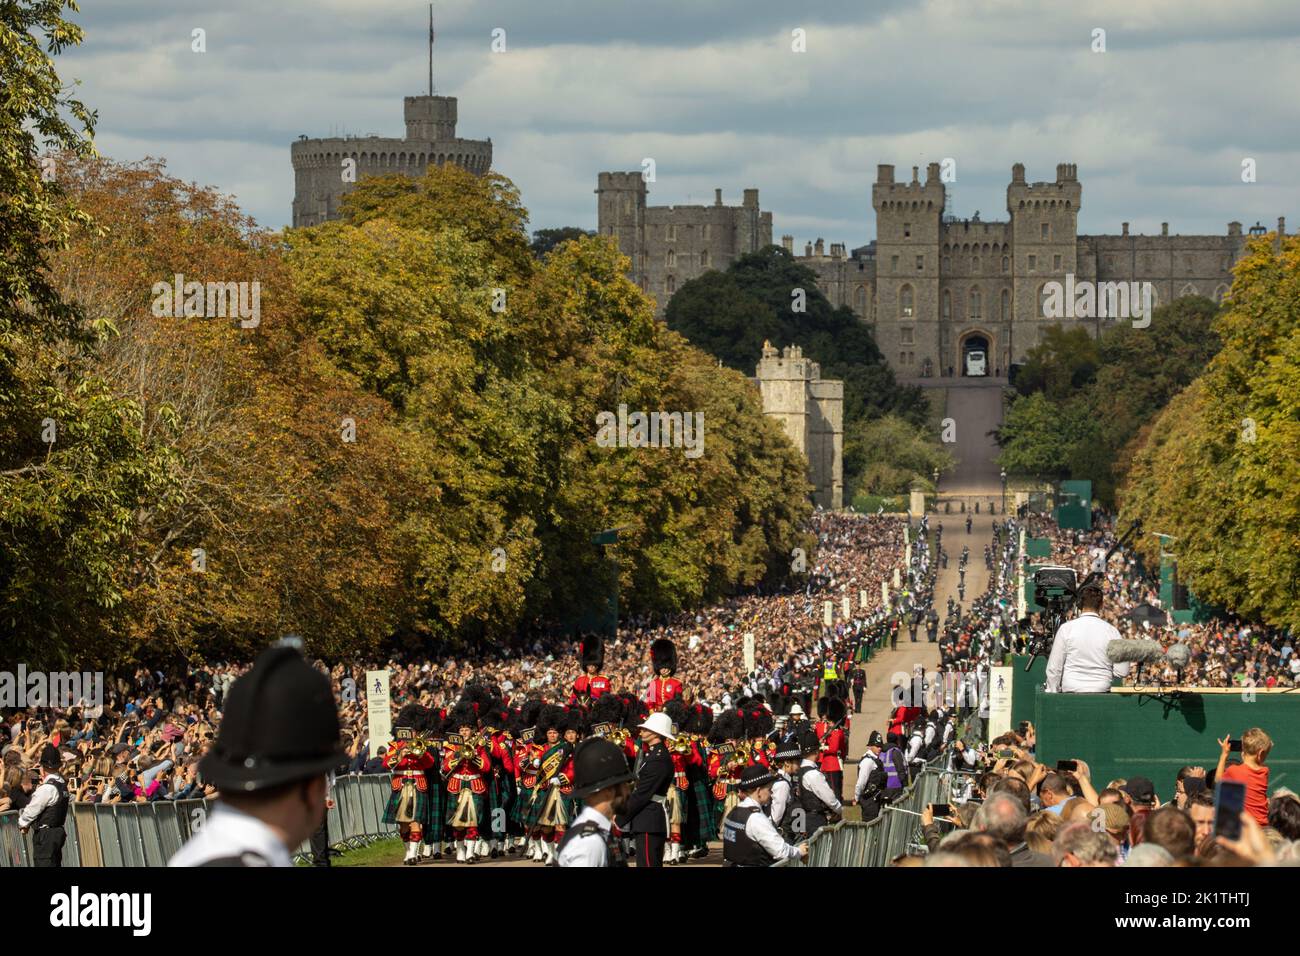 Windsor, UK. 19th September, 2022. Mourners watch the Massed Pipes and Drums of Scottish and Irish Regiments proceed along the Long Walk in Windsor Great Park prior to the procession of Queen Elizabeth II's coffin in the State Hearse to St George’s Chapel for the Committal Service. Queen Elizabeth II, the UK's longest-serving monarch, died at Balmoral aged 96 on 8th September 2022 after a reign lasting 70 years. Credit: Mark Kerrison/Alamy Live News Stock Photo